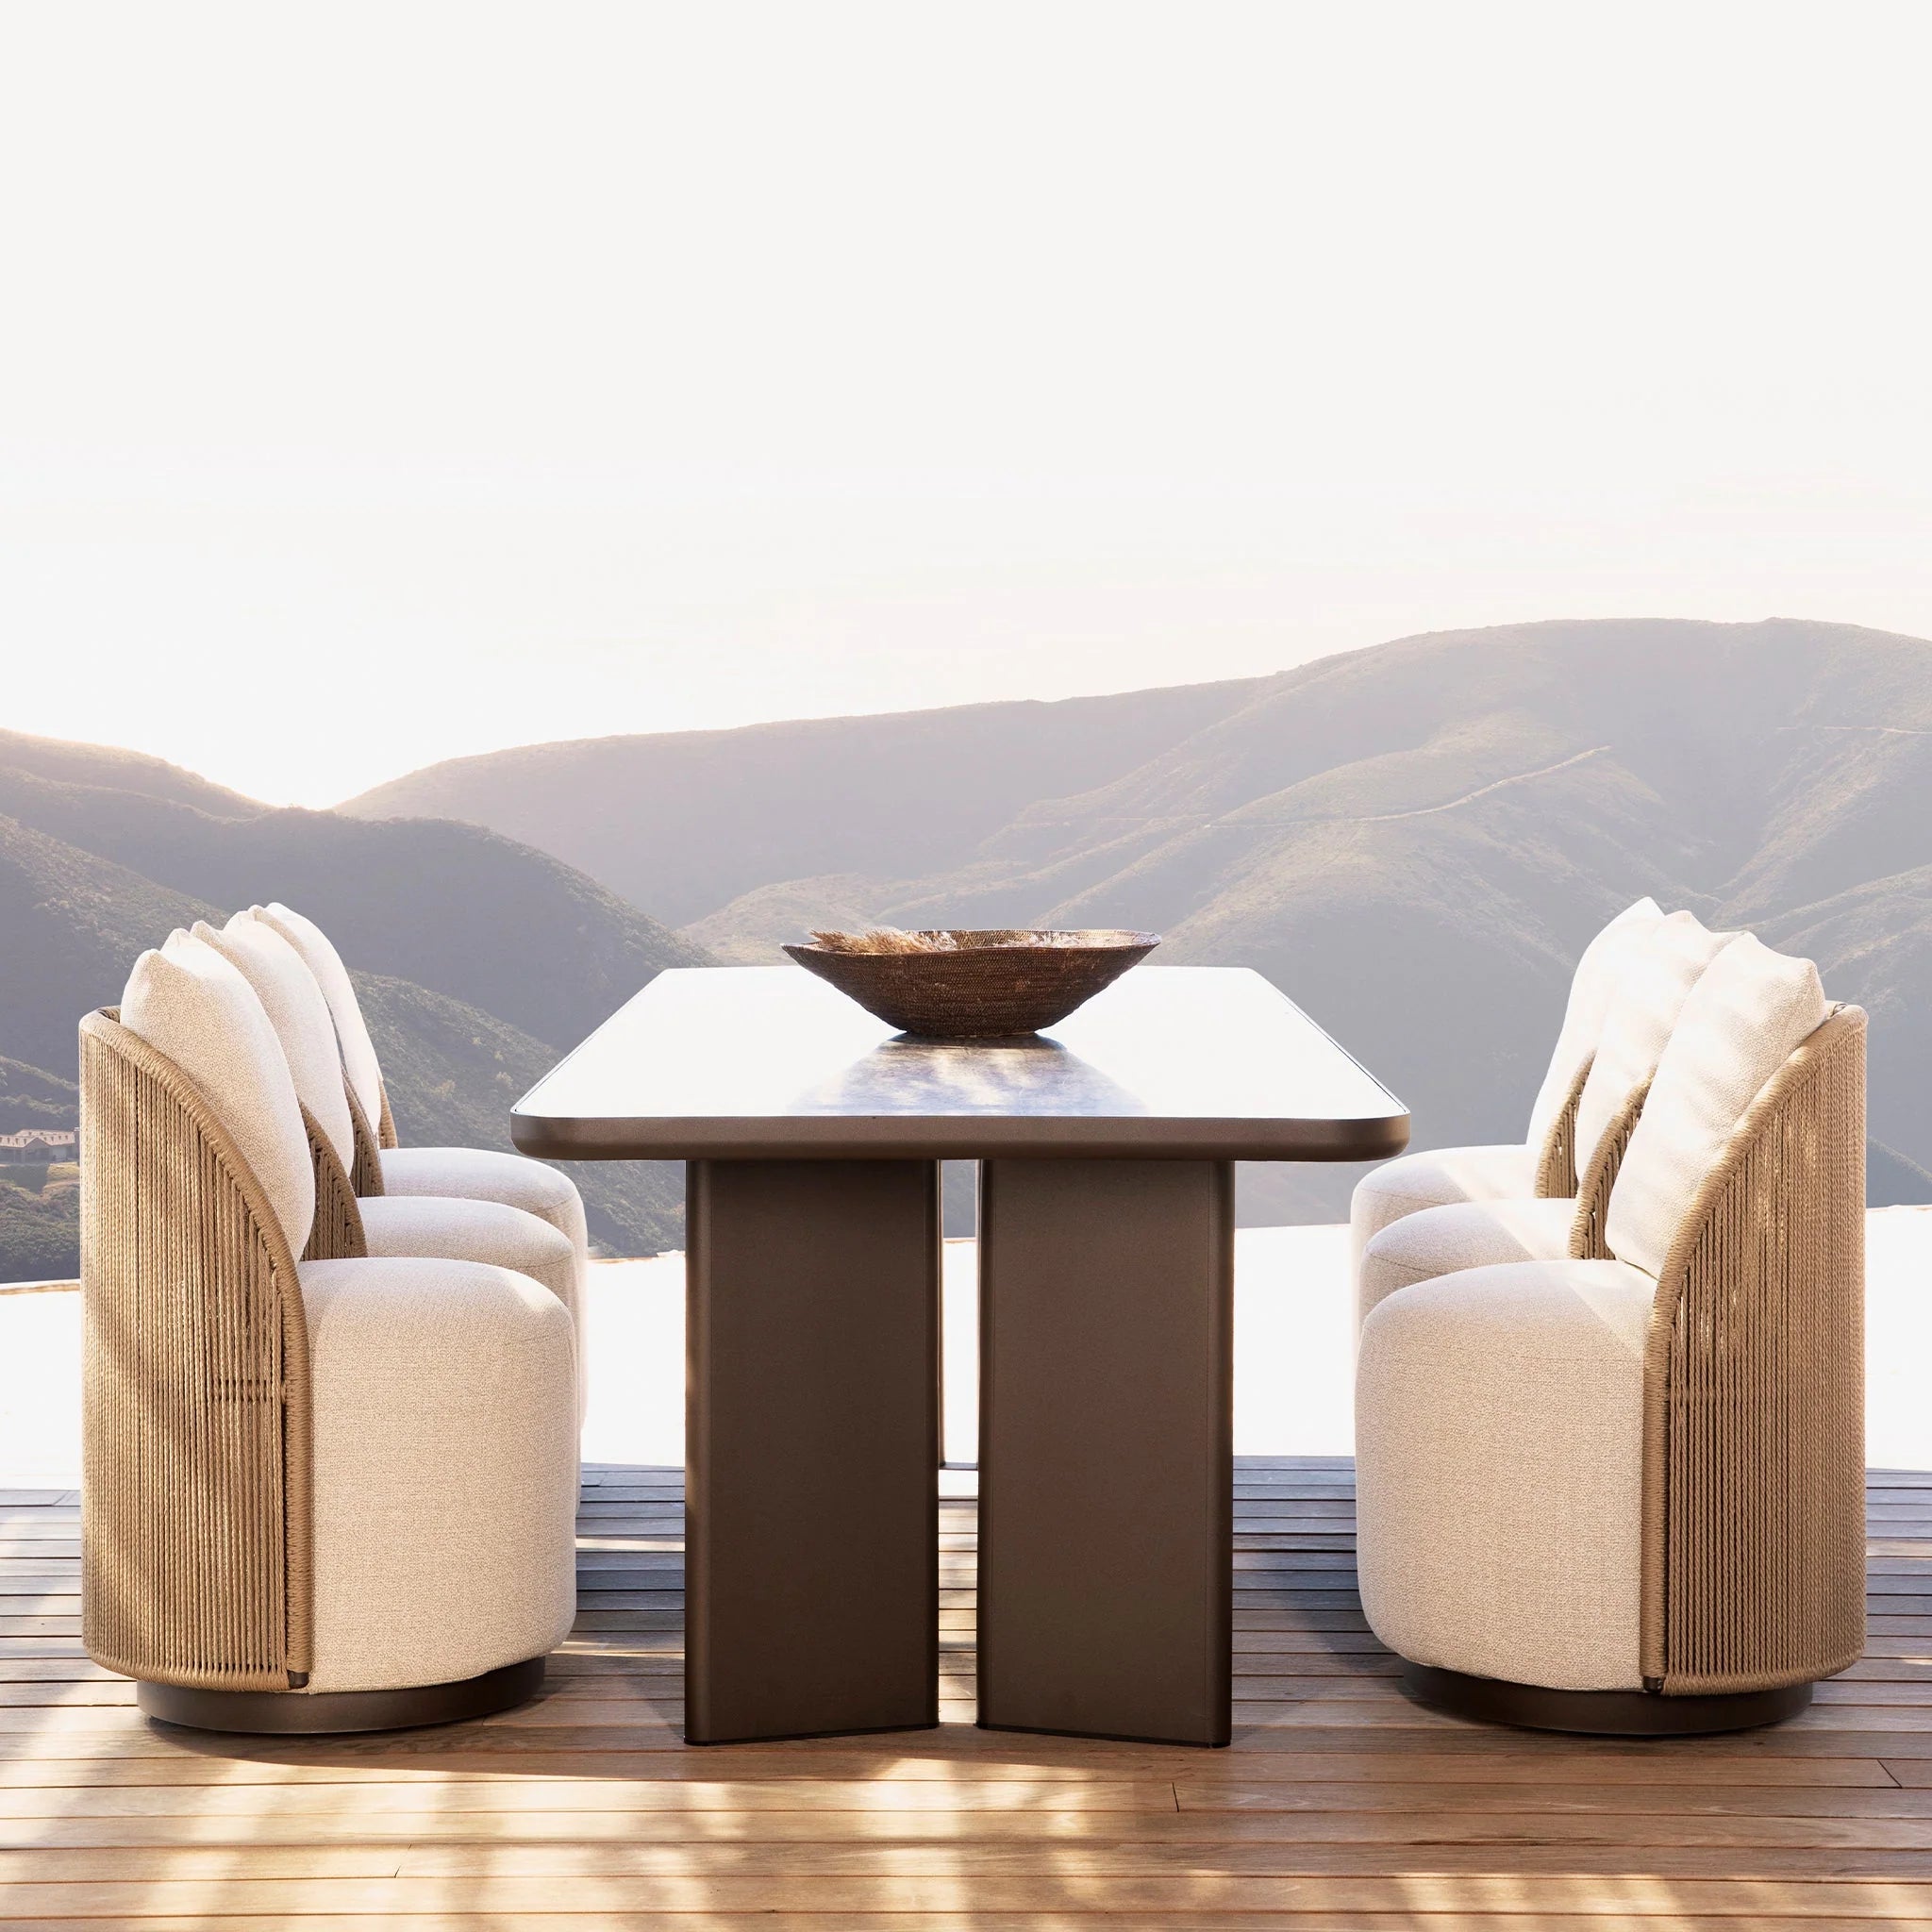 Boxhill's Milan Outdoor Swivel Dining Chair Lifetyle image